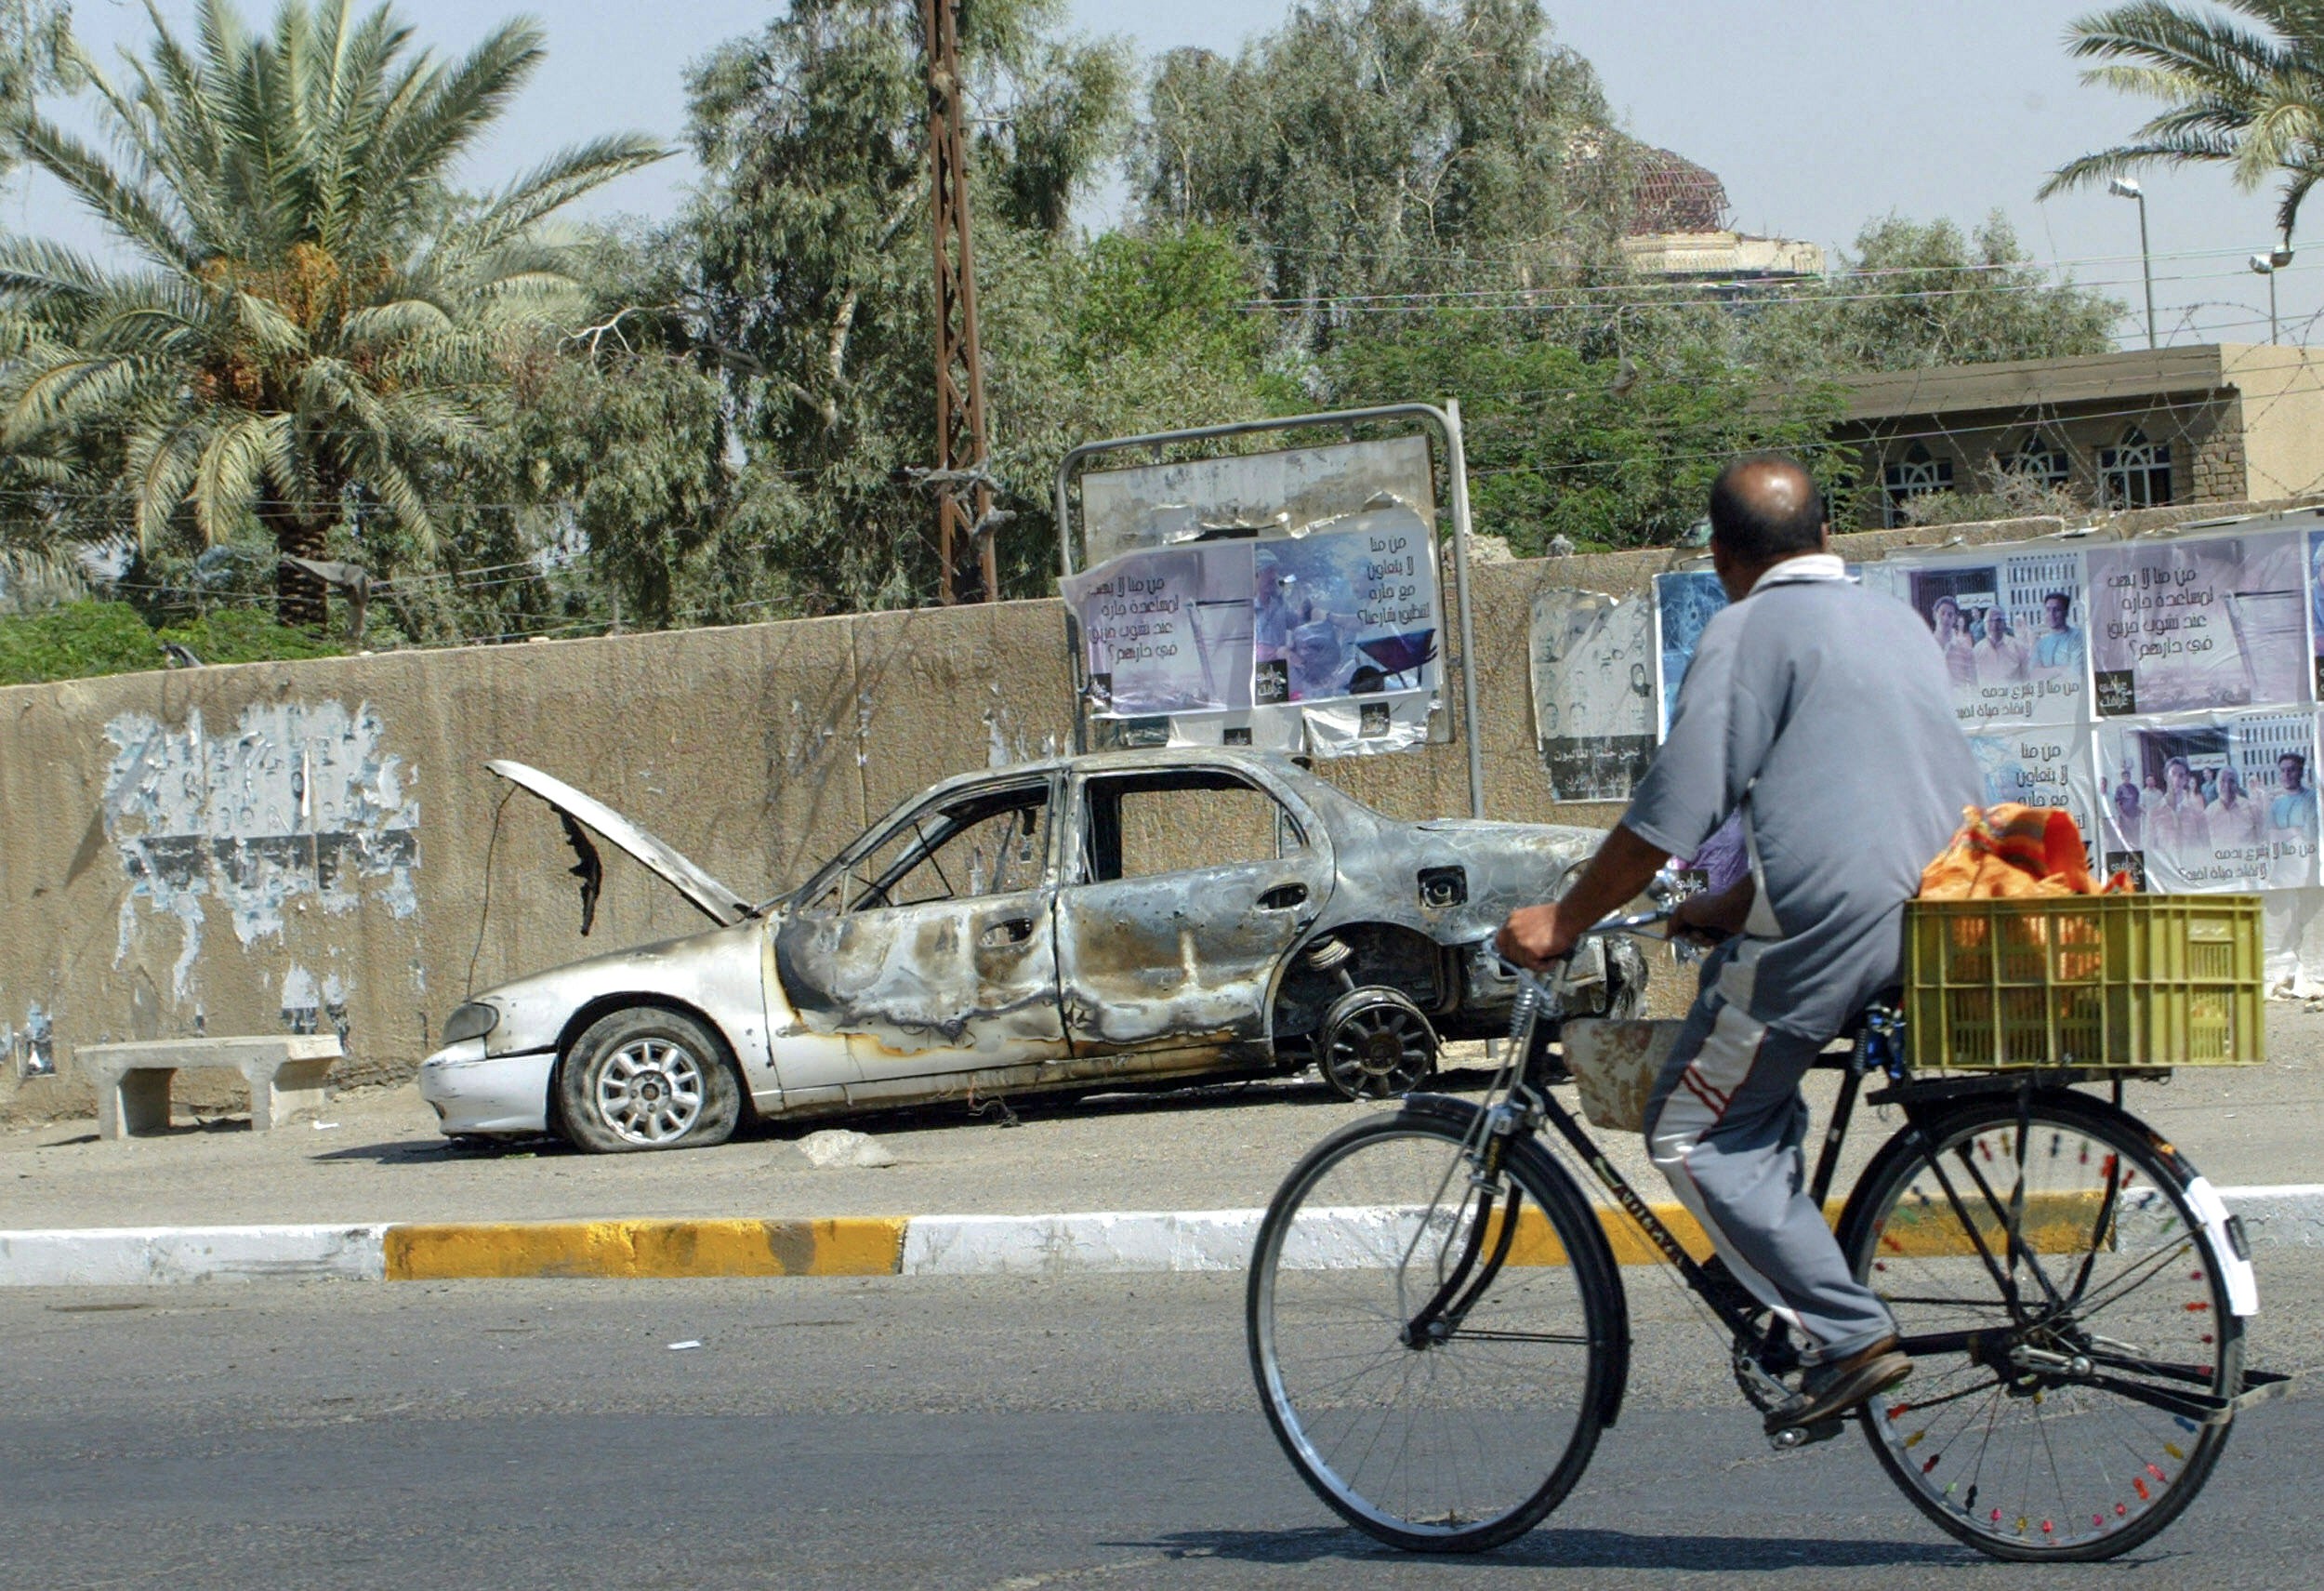 An Iraqi rides a bicycle, passing the remains of a car in Baghdad on September 20, 2007. The car caught fire during an incident when Blackwater guards who escorted U.S. embassy officials opened fire in the Baghdad neighborhood on September 16, 2007, killing 10 people and injuring. 13. Iraq and the United States agreed to set up a joint commission to investigate the safety of U.S. government civilians in Iraq following the deadly shooting of a private security company, Blackwater, State Department spokesman Tom Casey said. AFP PHOTO / ALI YUSSEF (photo should be read via ALI YUSSEF / AFP Getty Images)